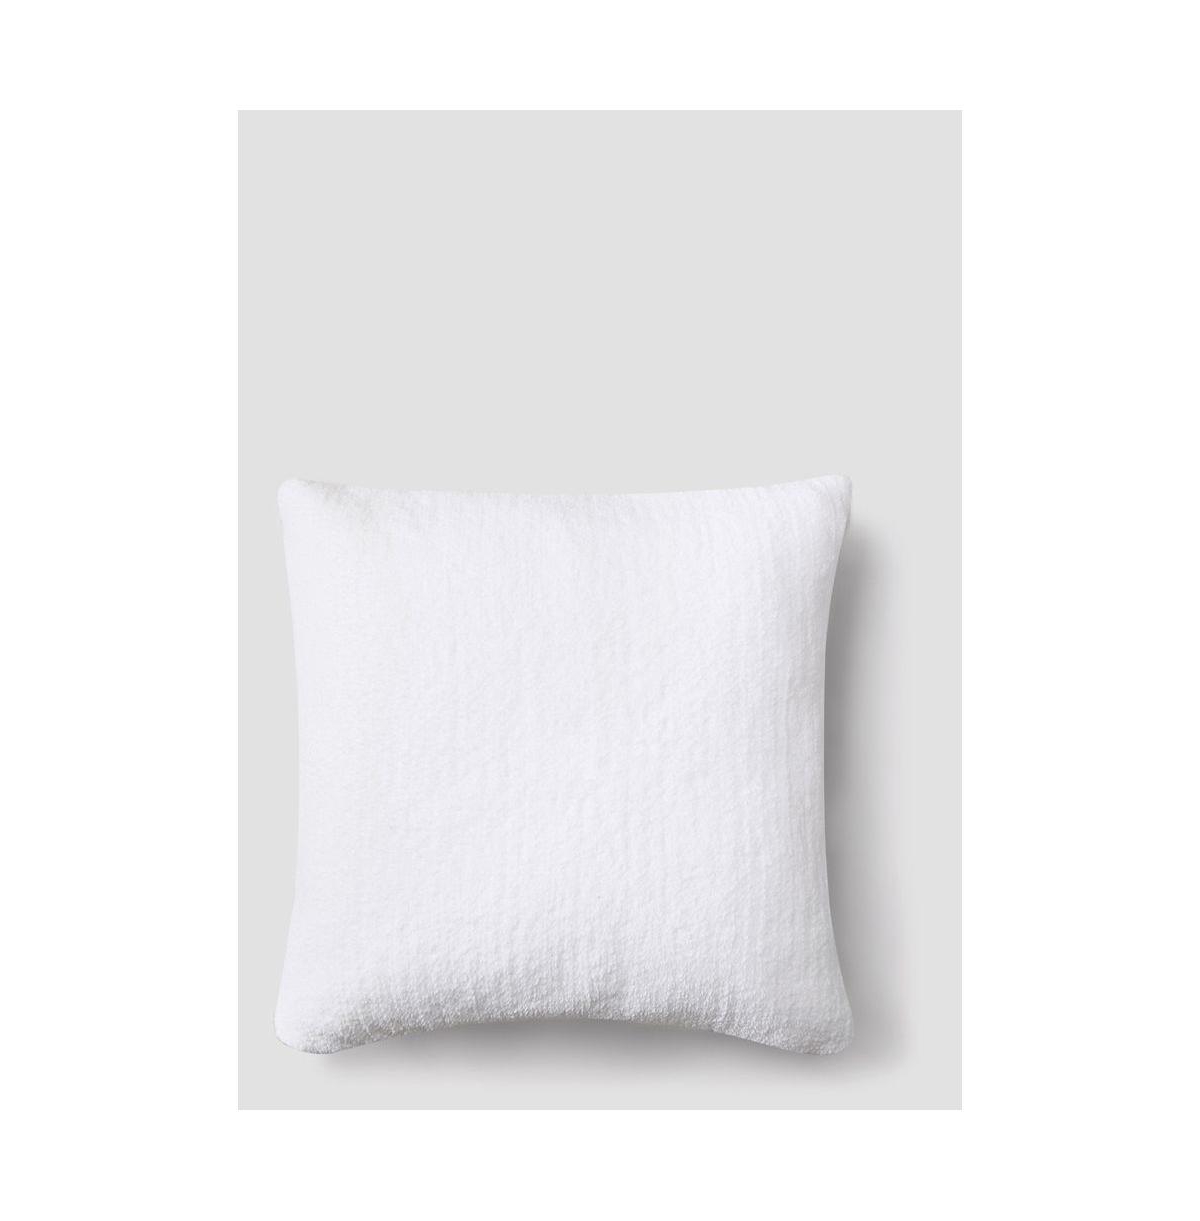 Sunday Citizen Snug Decorative Pillow, 20" X 20" In Clear White